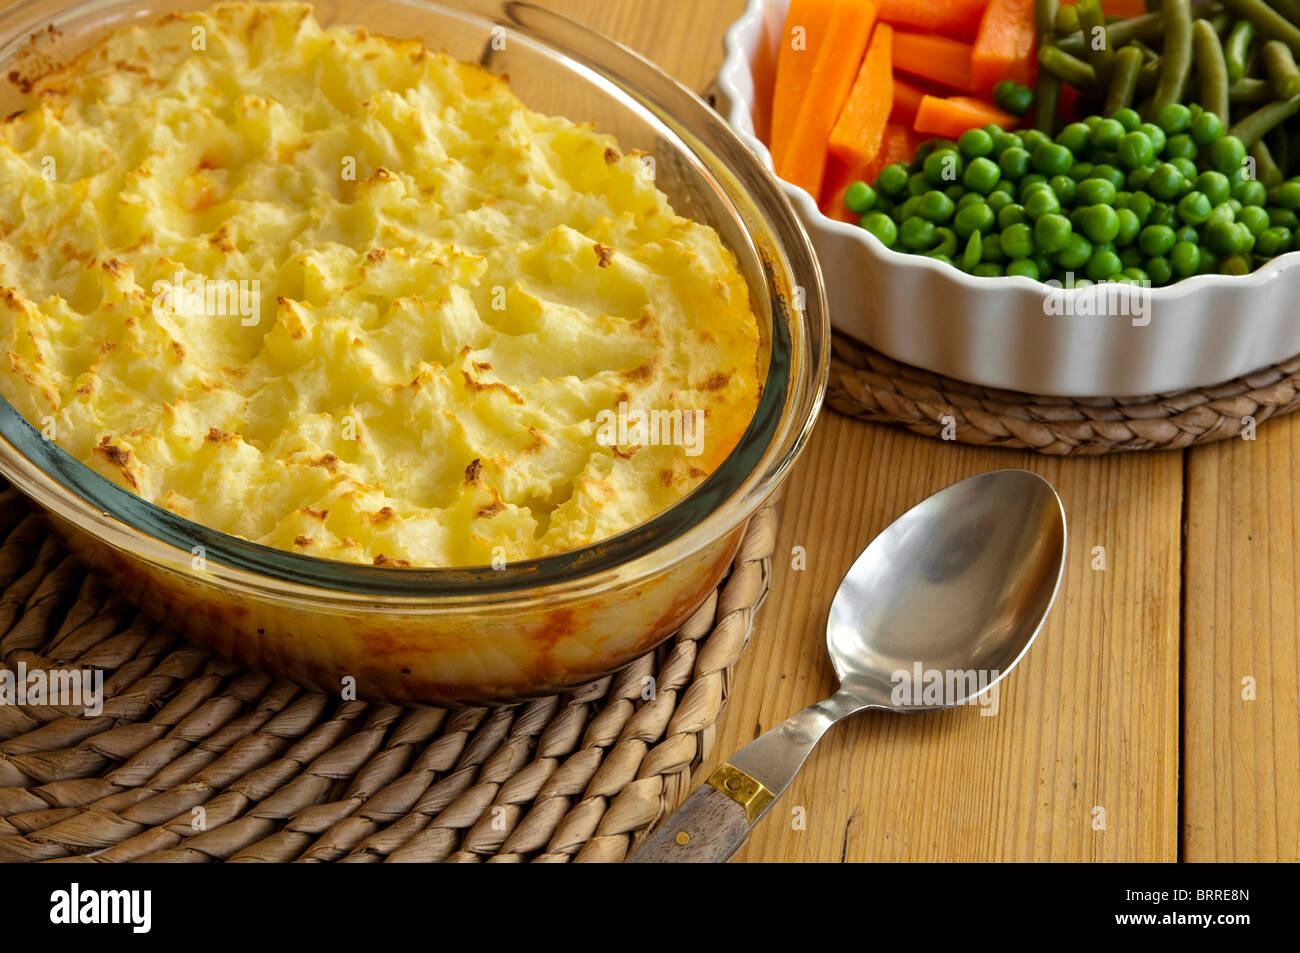 Shepherds Pie, with vegetables - carrots, french beans and peas - healthy home cooking ready to be served. Stock Photo